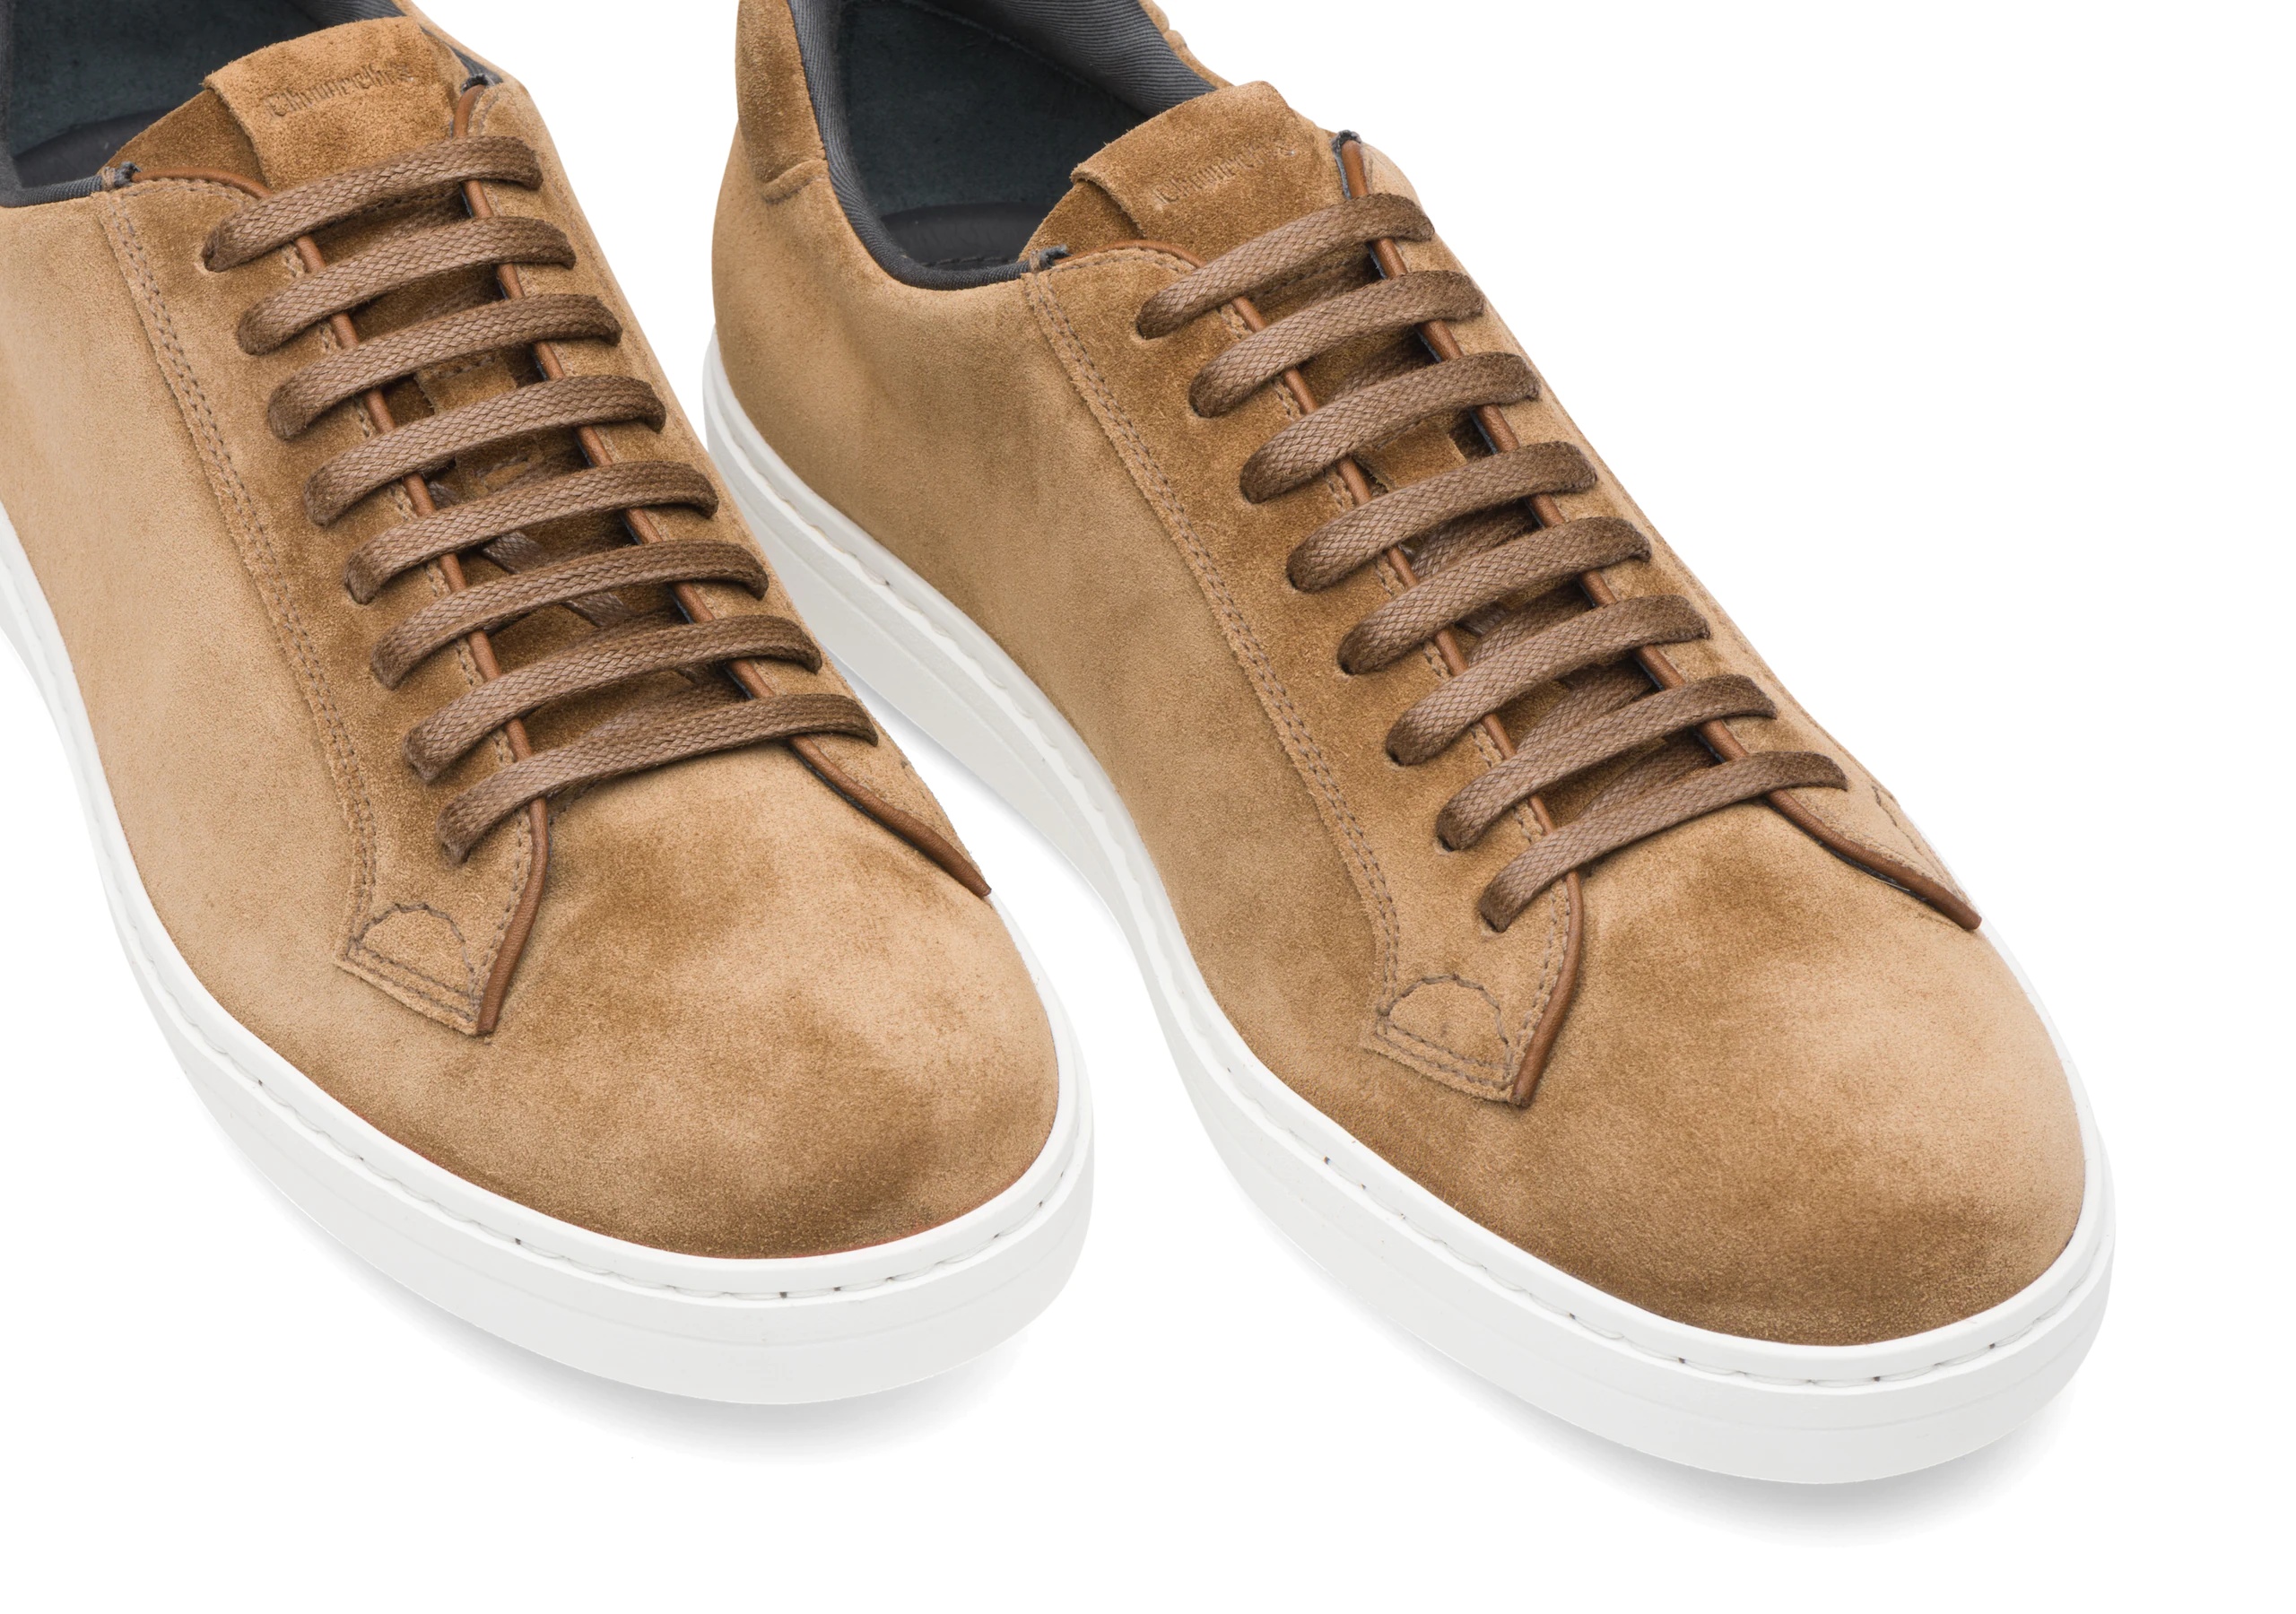 Boland
Suede Classic Sneaker Sigar - 4